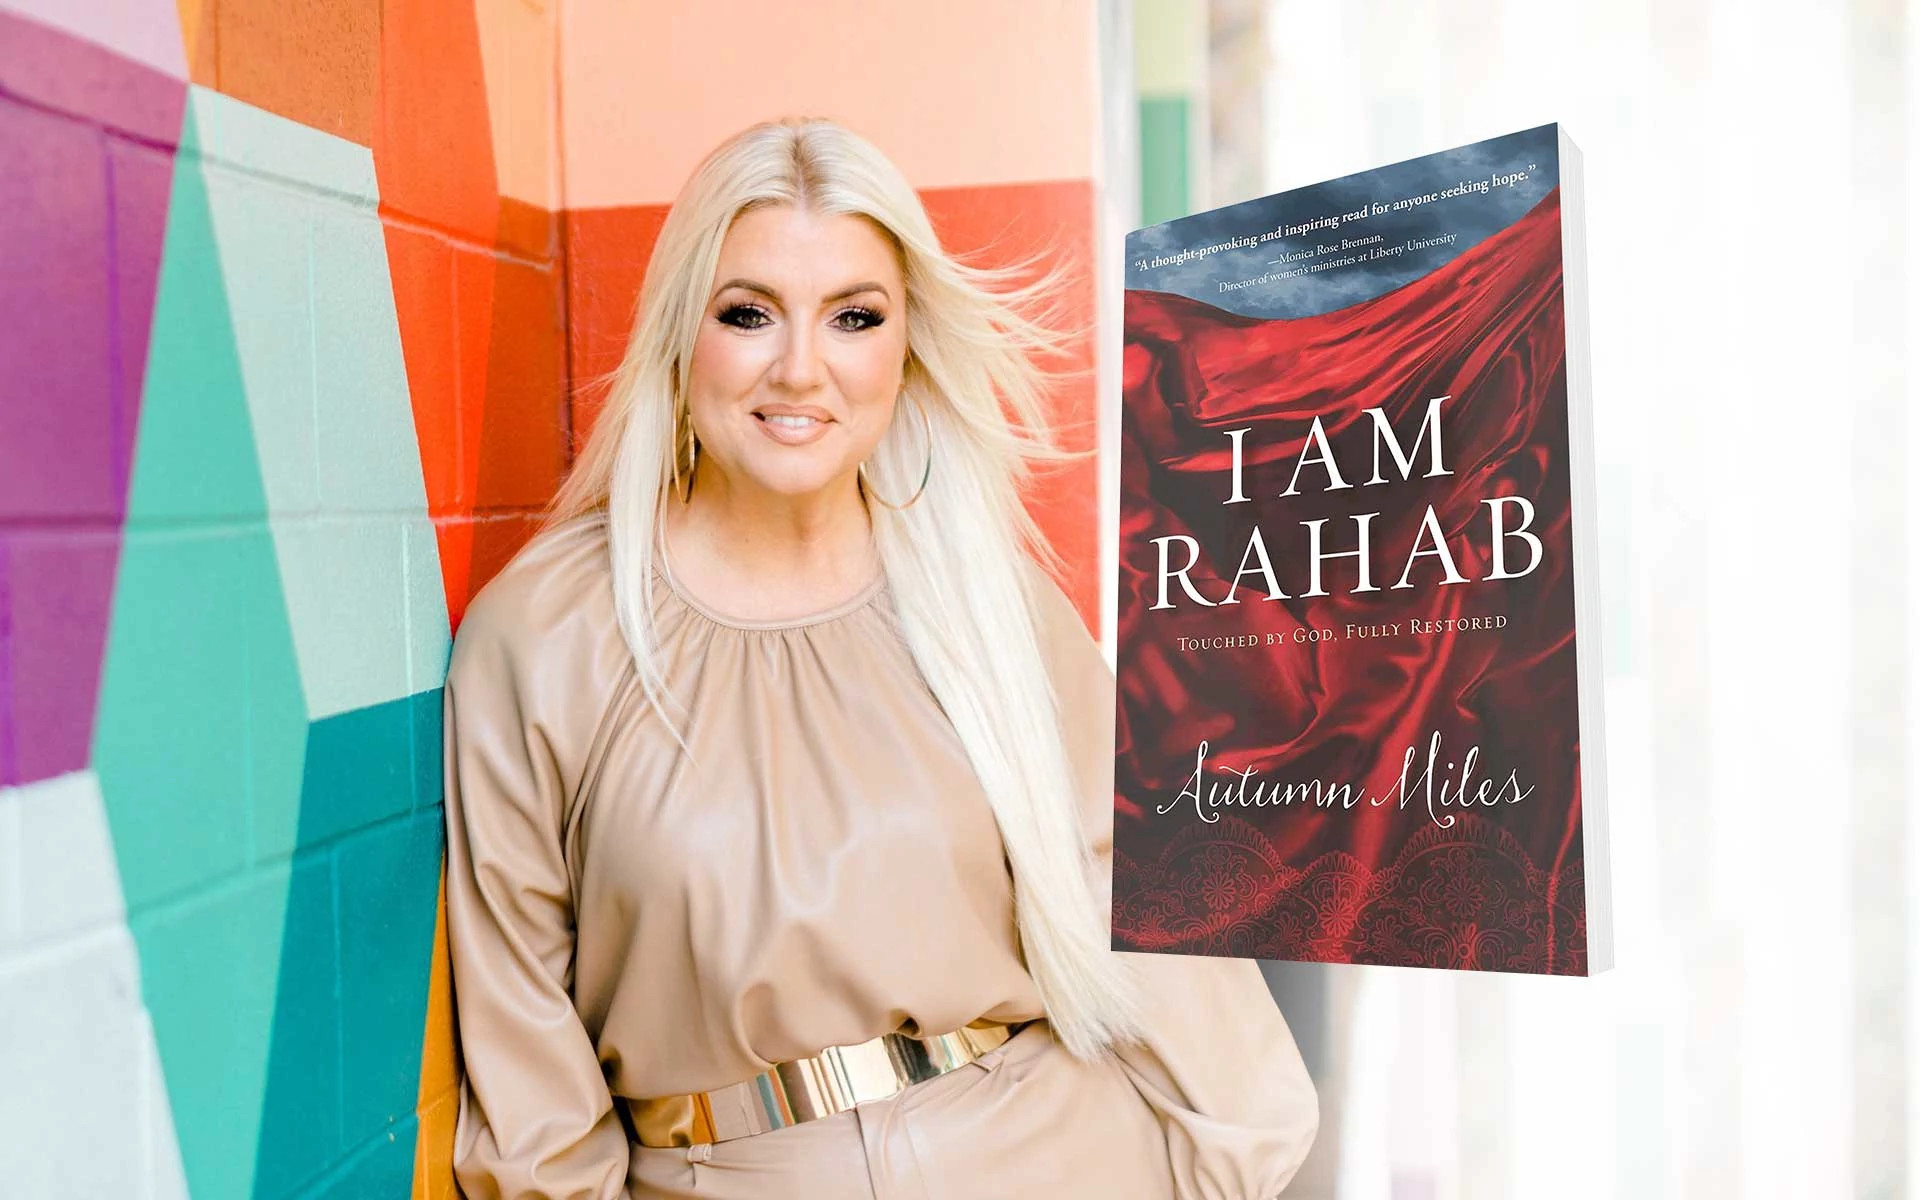 I am Rahab: Touched by God, Fully Restored